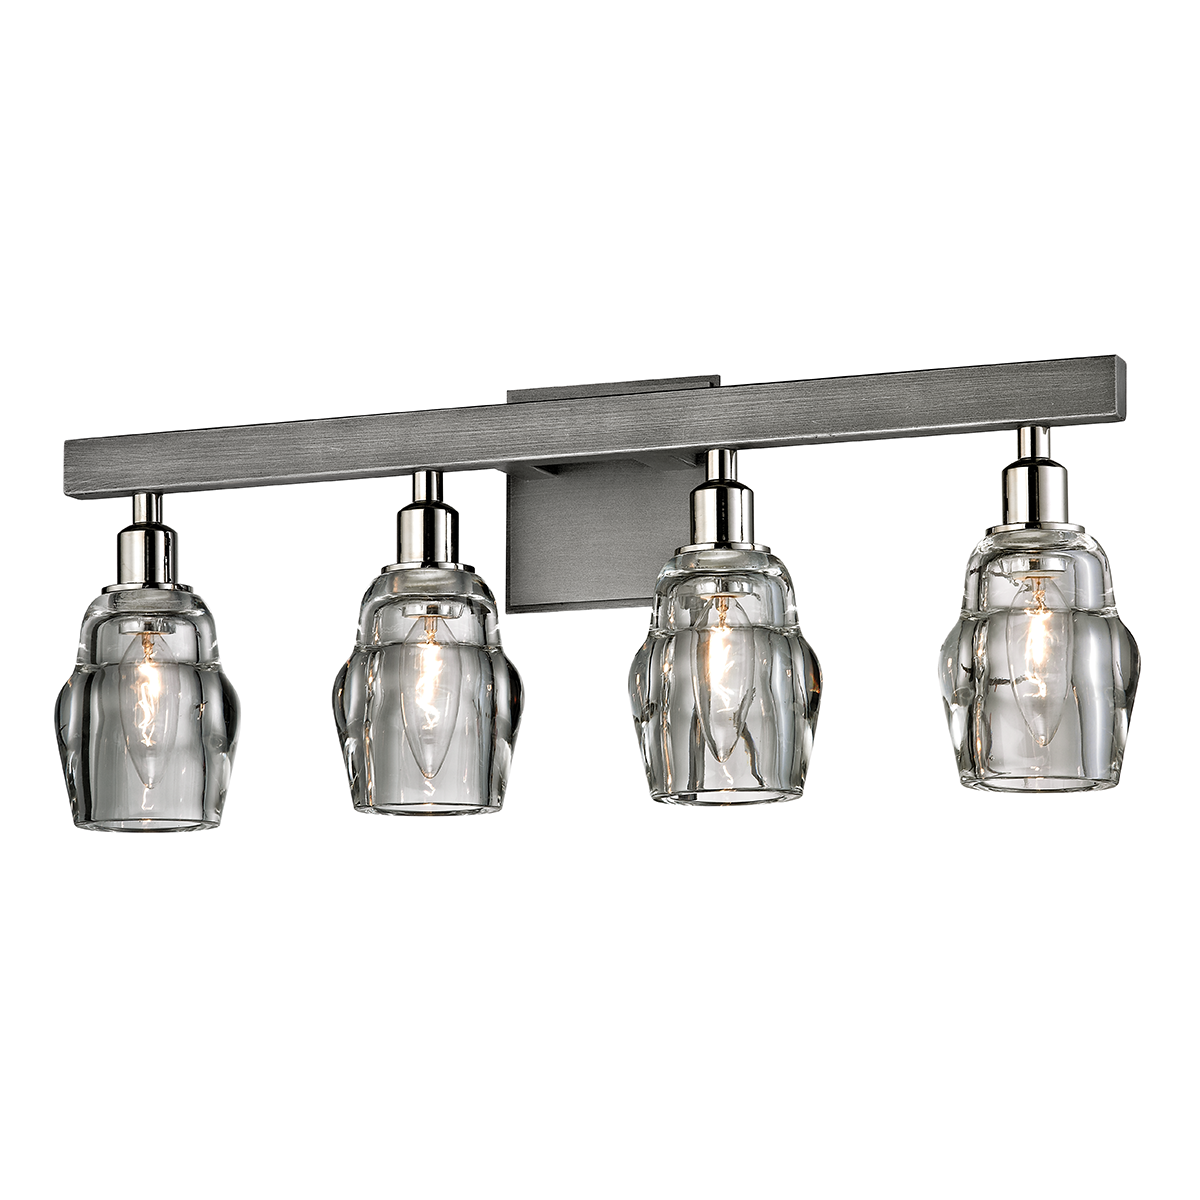 Troy Lighting Citizen Bath and Vanity Bath and Vanity Troy Lighting GRAPHITE AND POLISHED NICKEL 22.75x22.75x9 